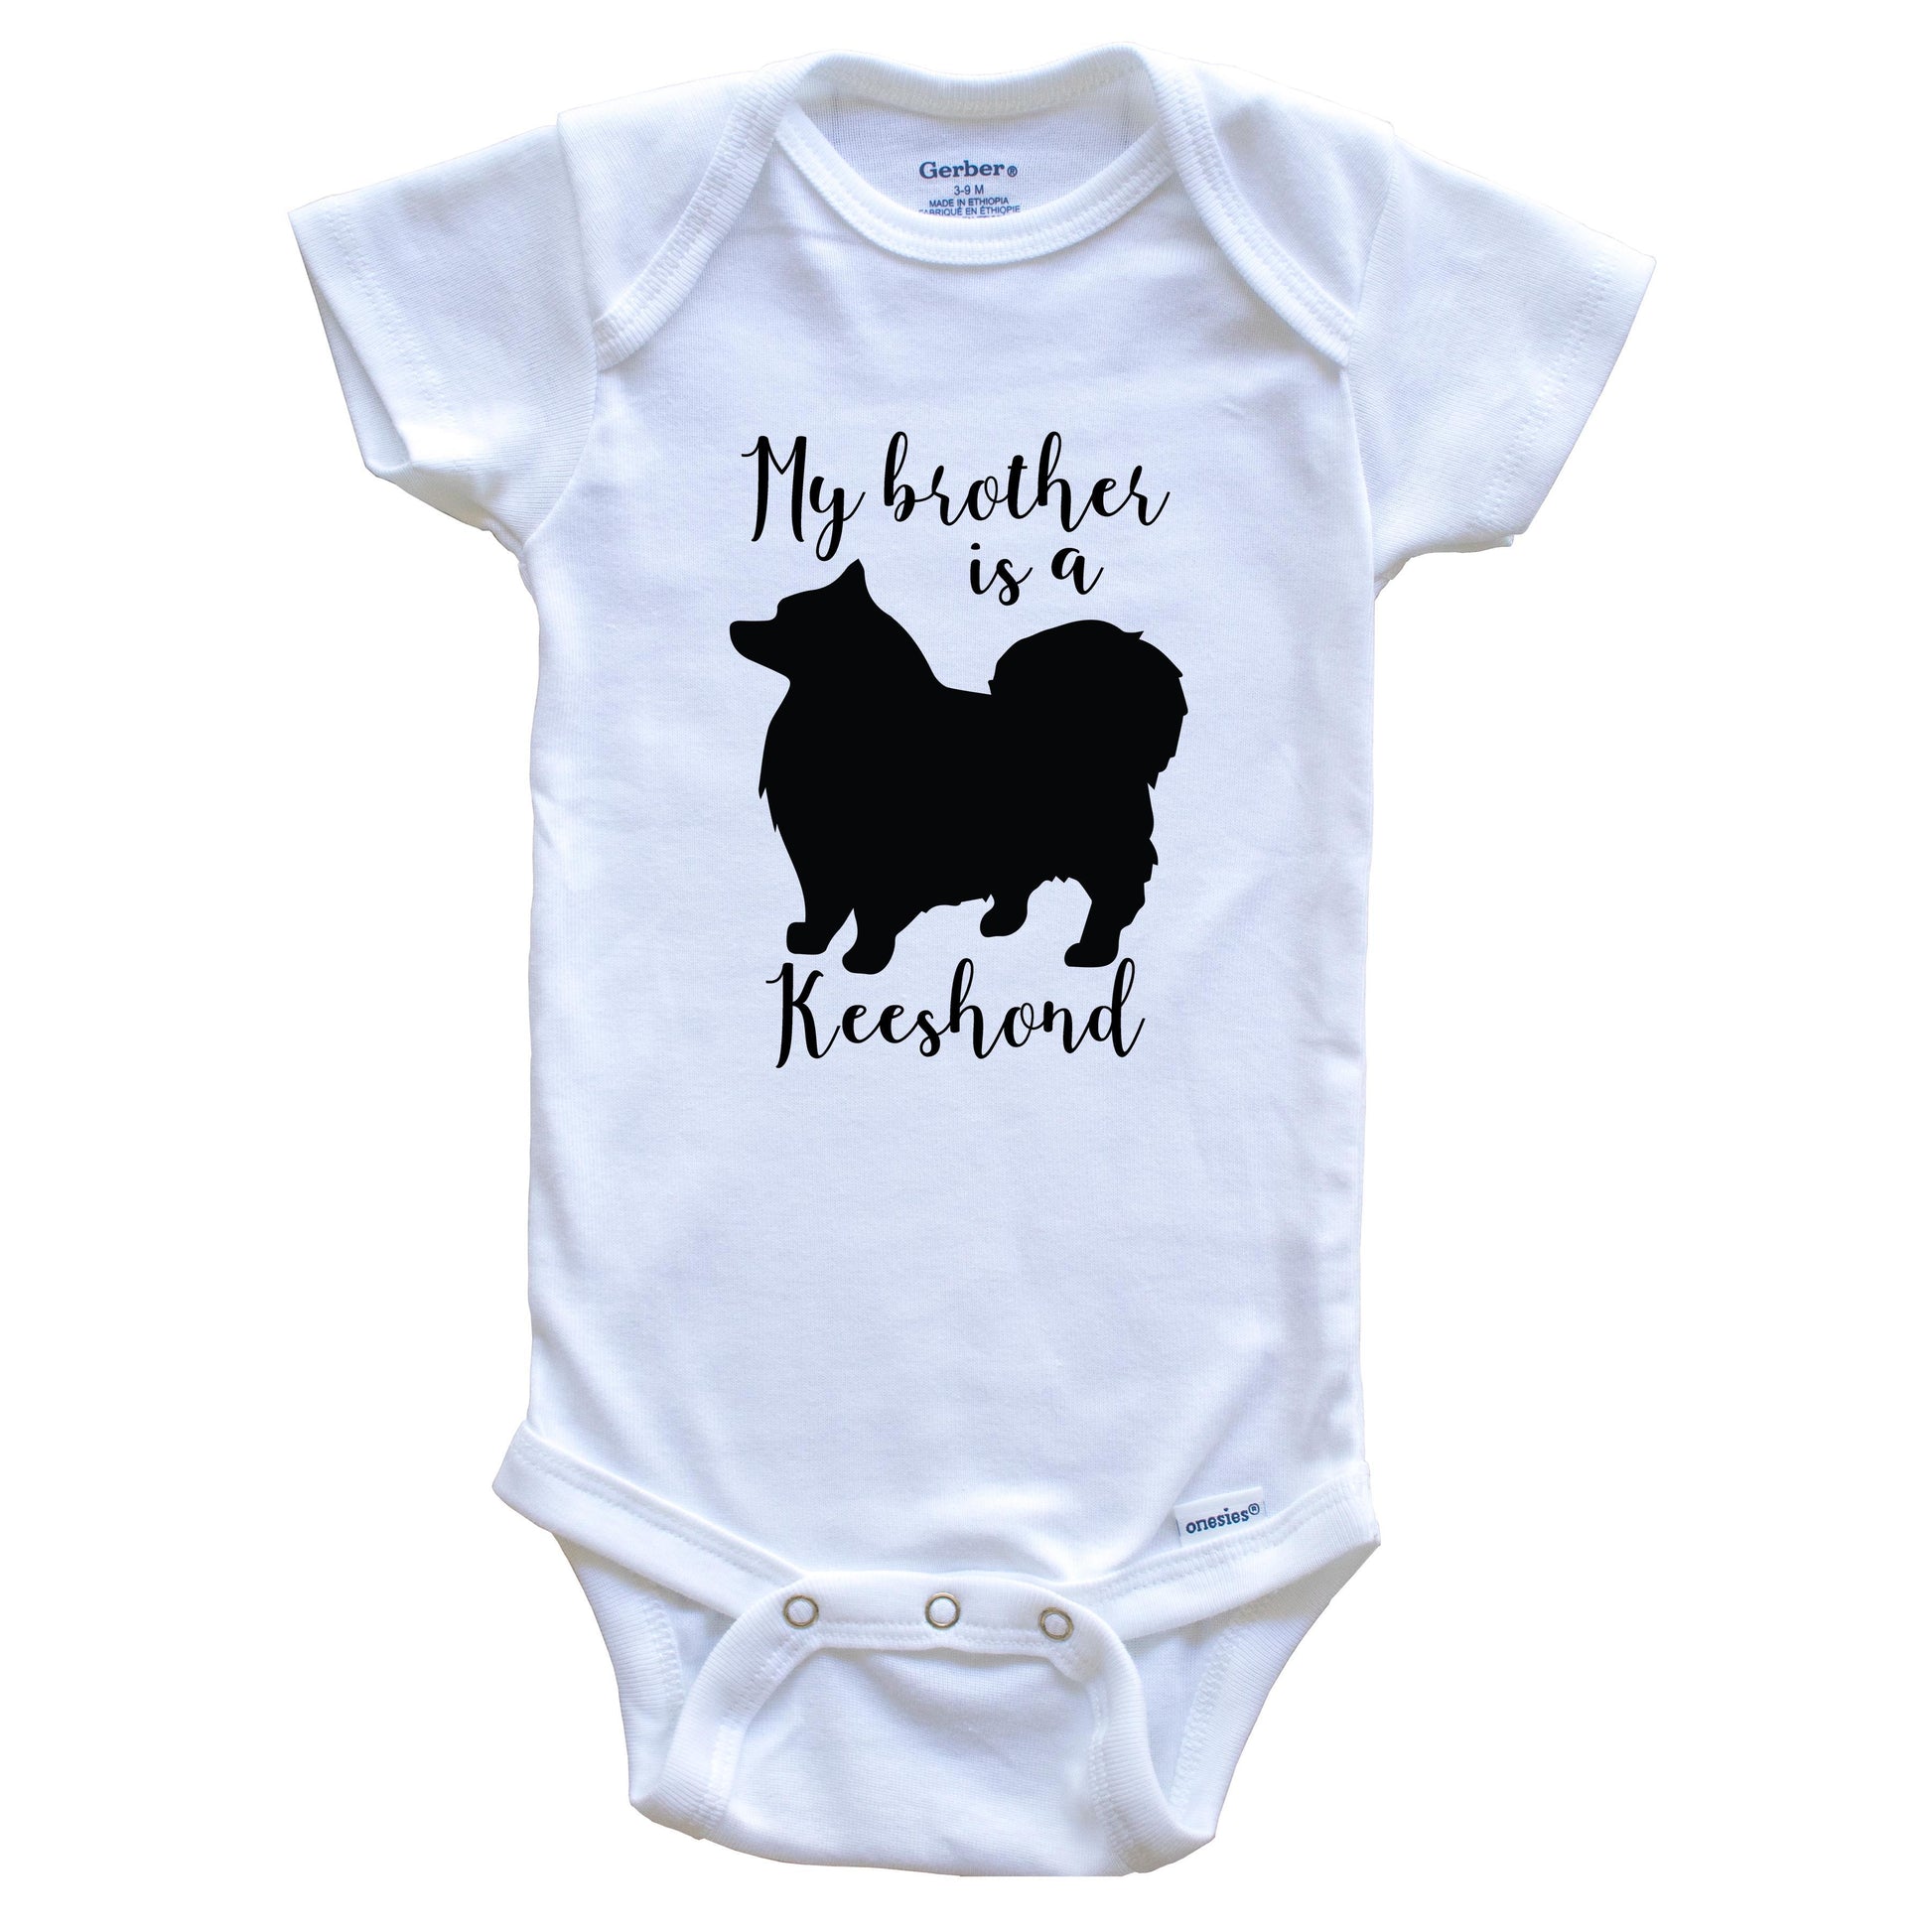 My Brother Is A Keeshond Cute Dog Baby Onesie - Keeshond One Piece Baby Bodysuit